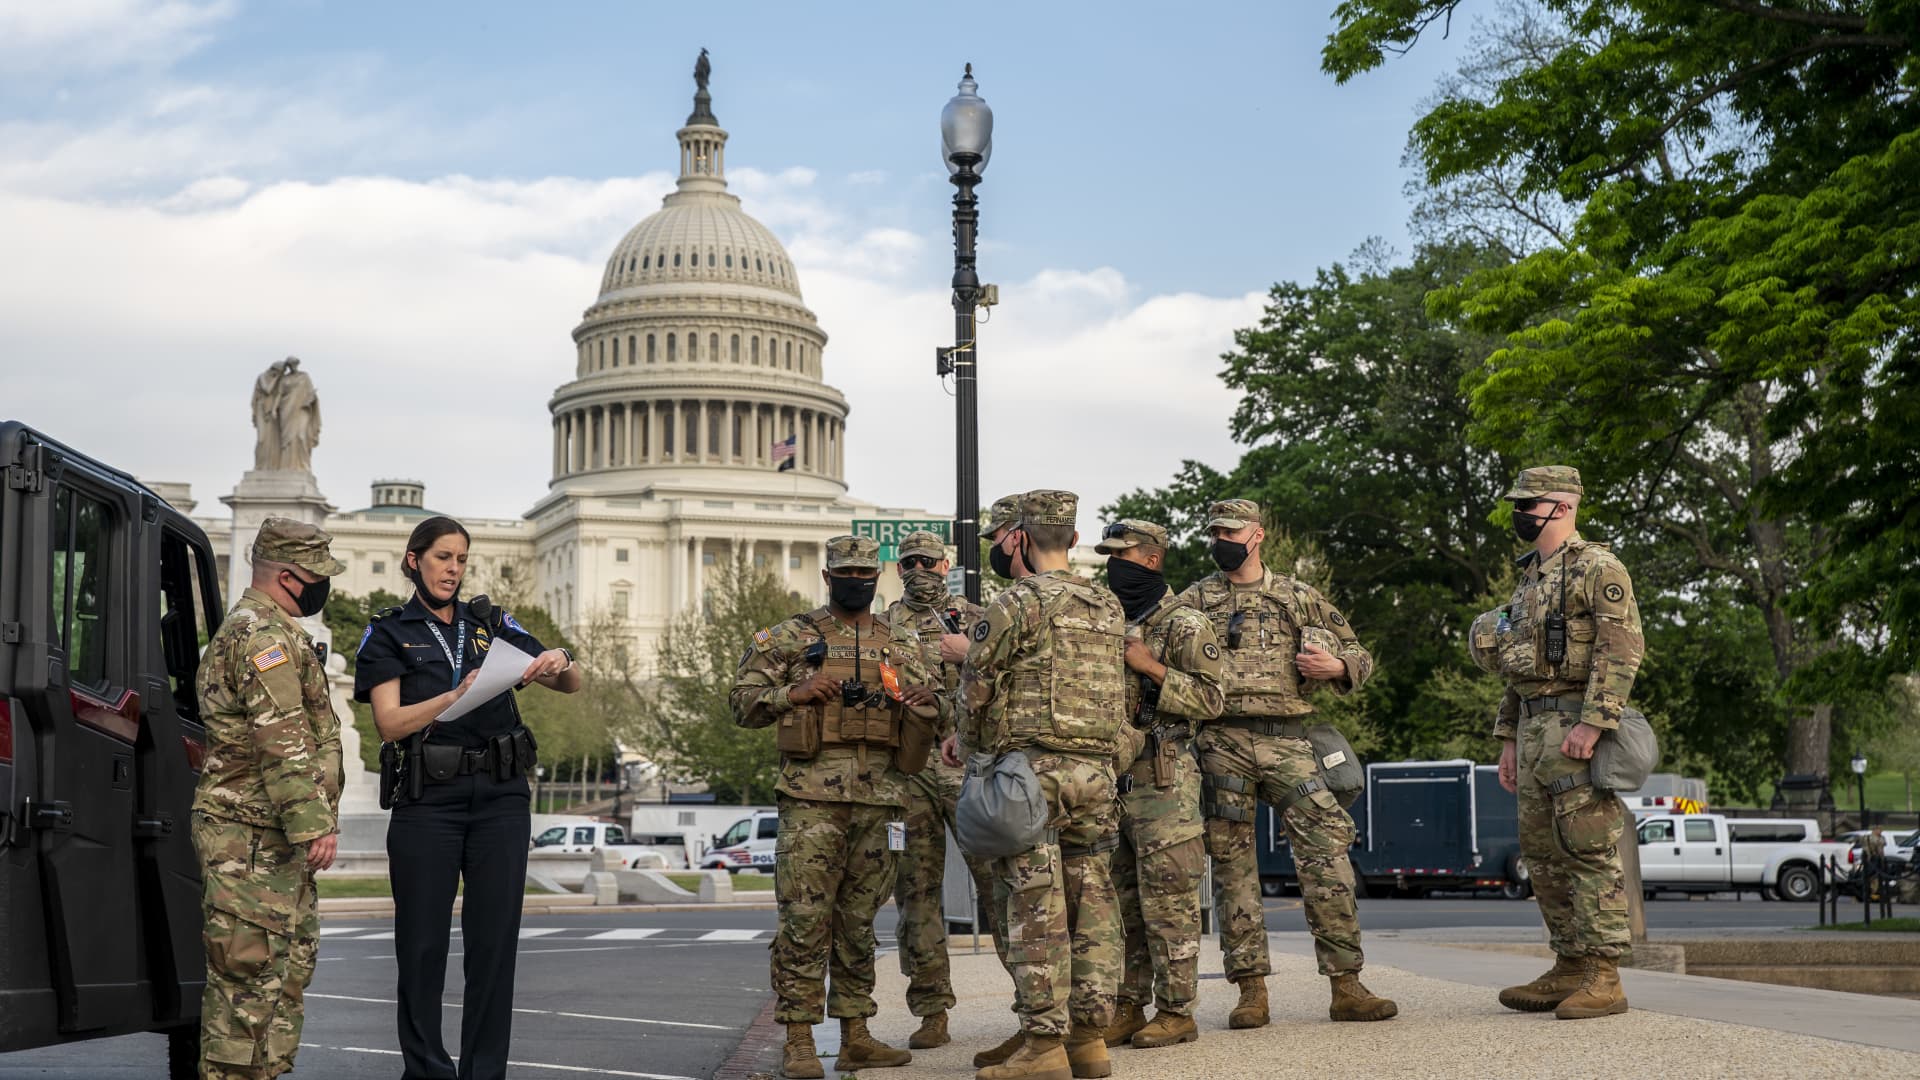 Military personal and Capitol Hill Police department stage outside the US Capitol before U.S. President Joe Biden will address a joint session of Congress in the House chamber of the U.S. Capitol April 28, 2021 in Washington, DC.